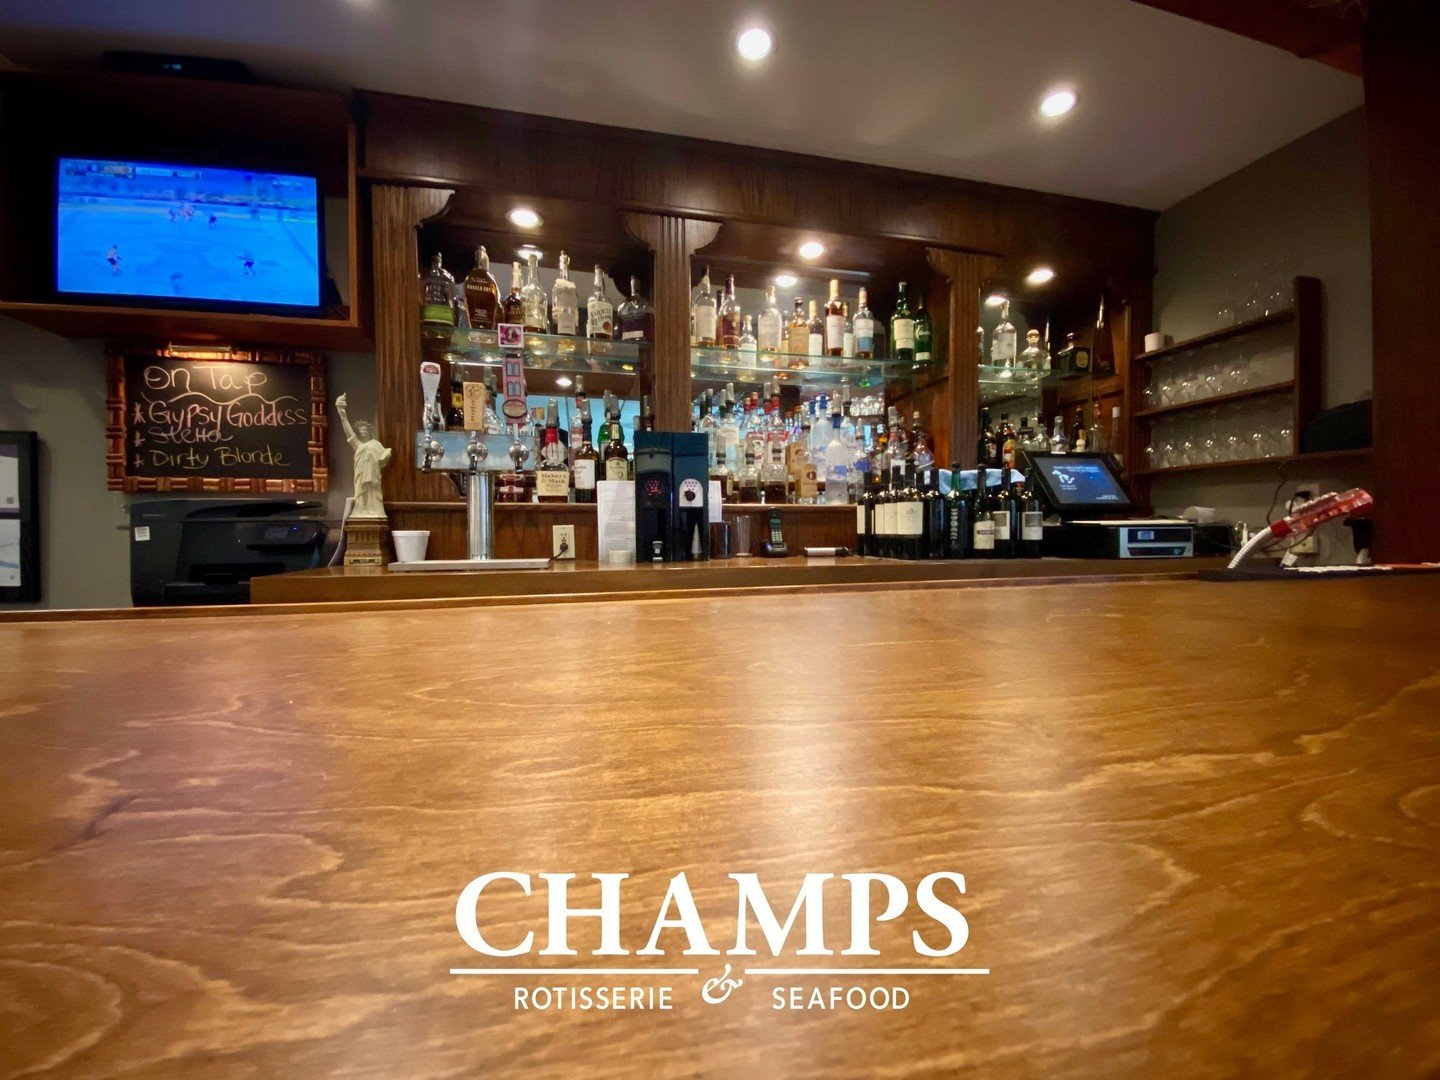 Come relax and unwind at Champs Bar, where every visit is a toast to good times.